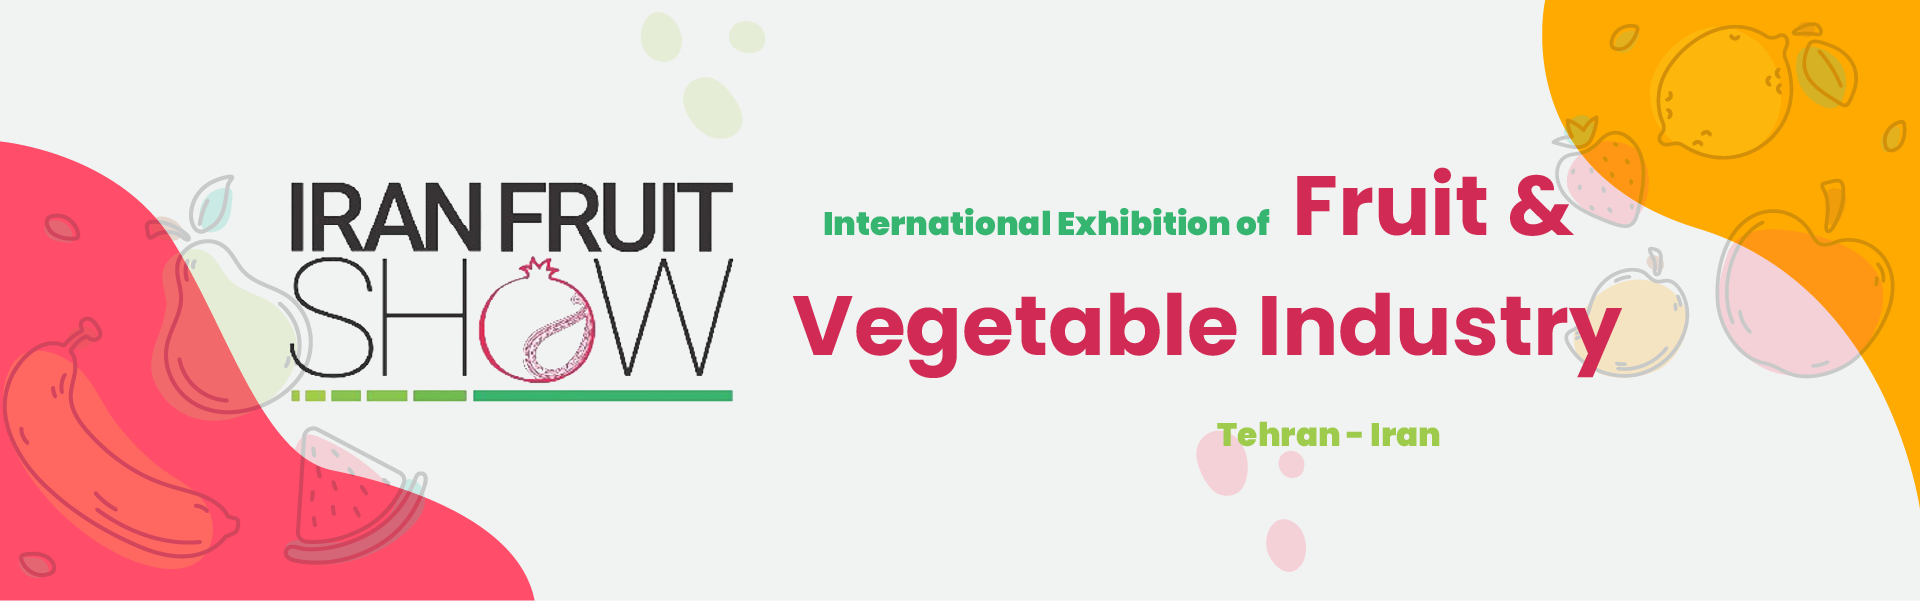 Fruit and vegetable industry Exhibition Tehran Iran